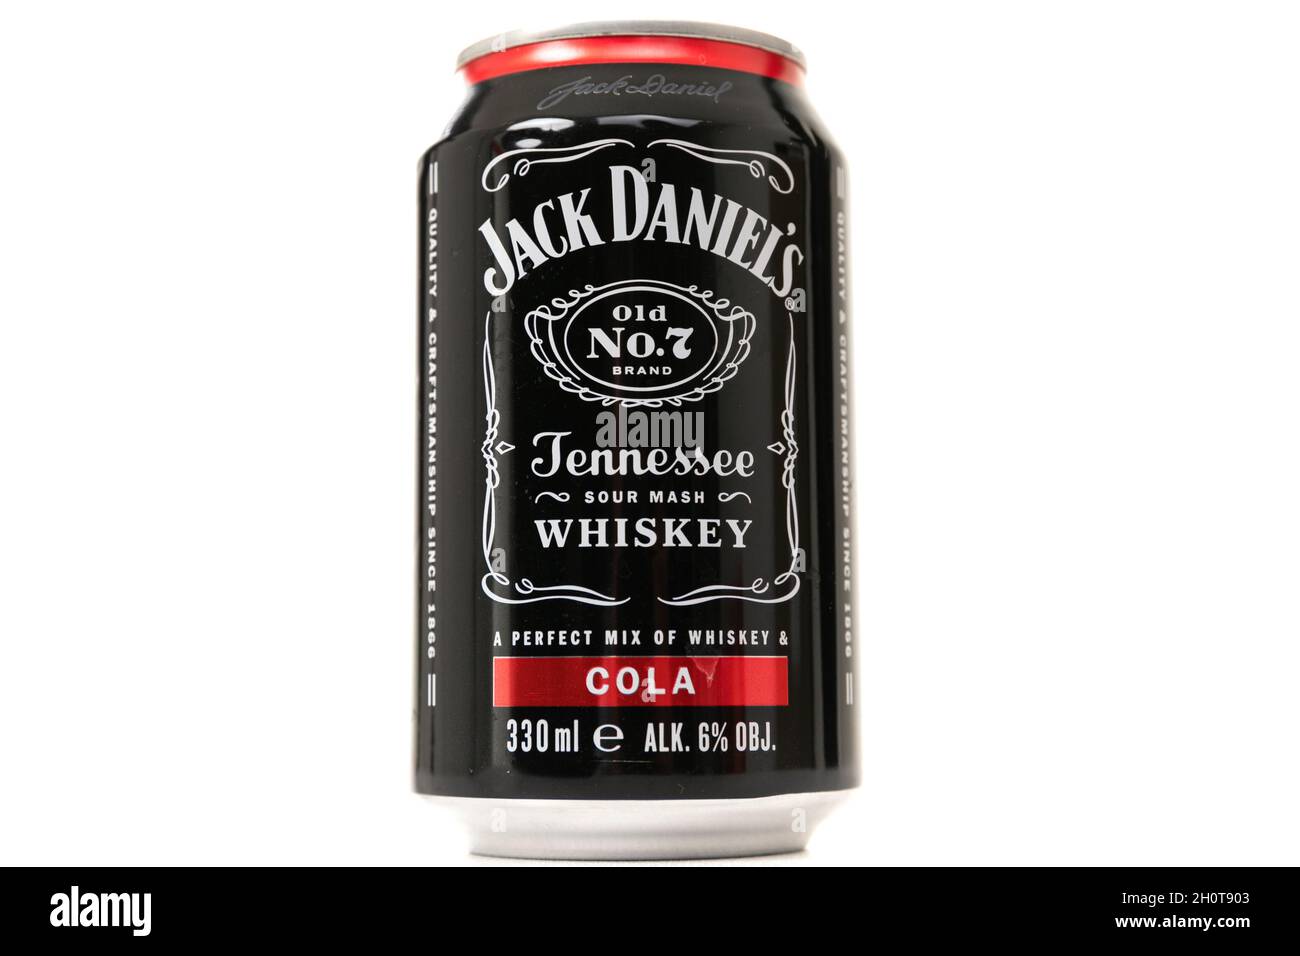 MINSK, BELARUS - OCT 14, 2021: Jack daniels cocktail whiskey with cola in an aluminum can Stock Photo